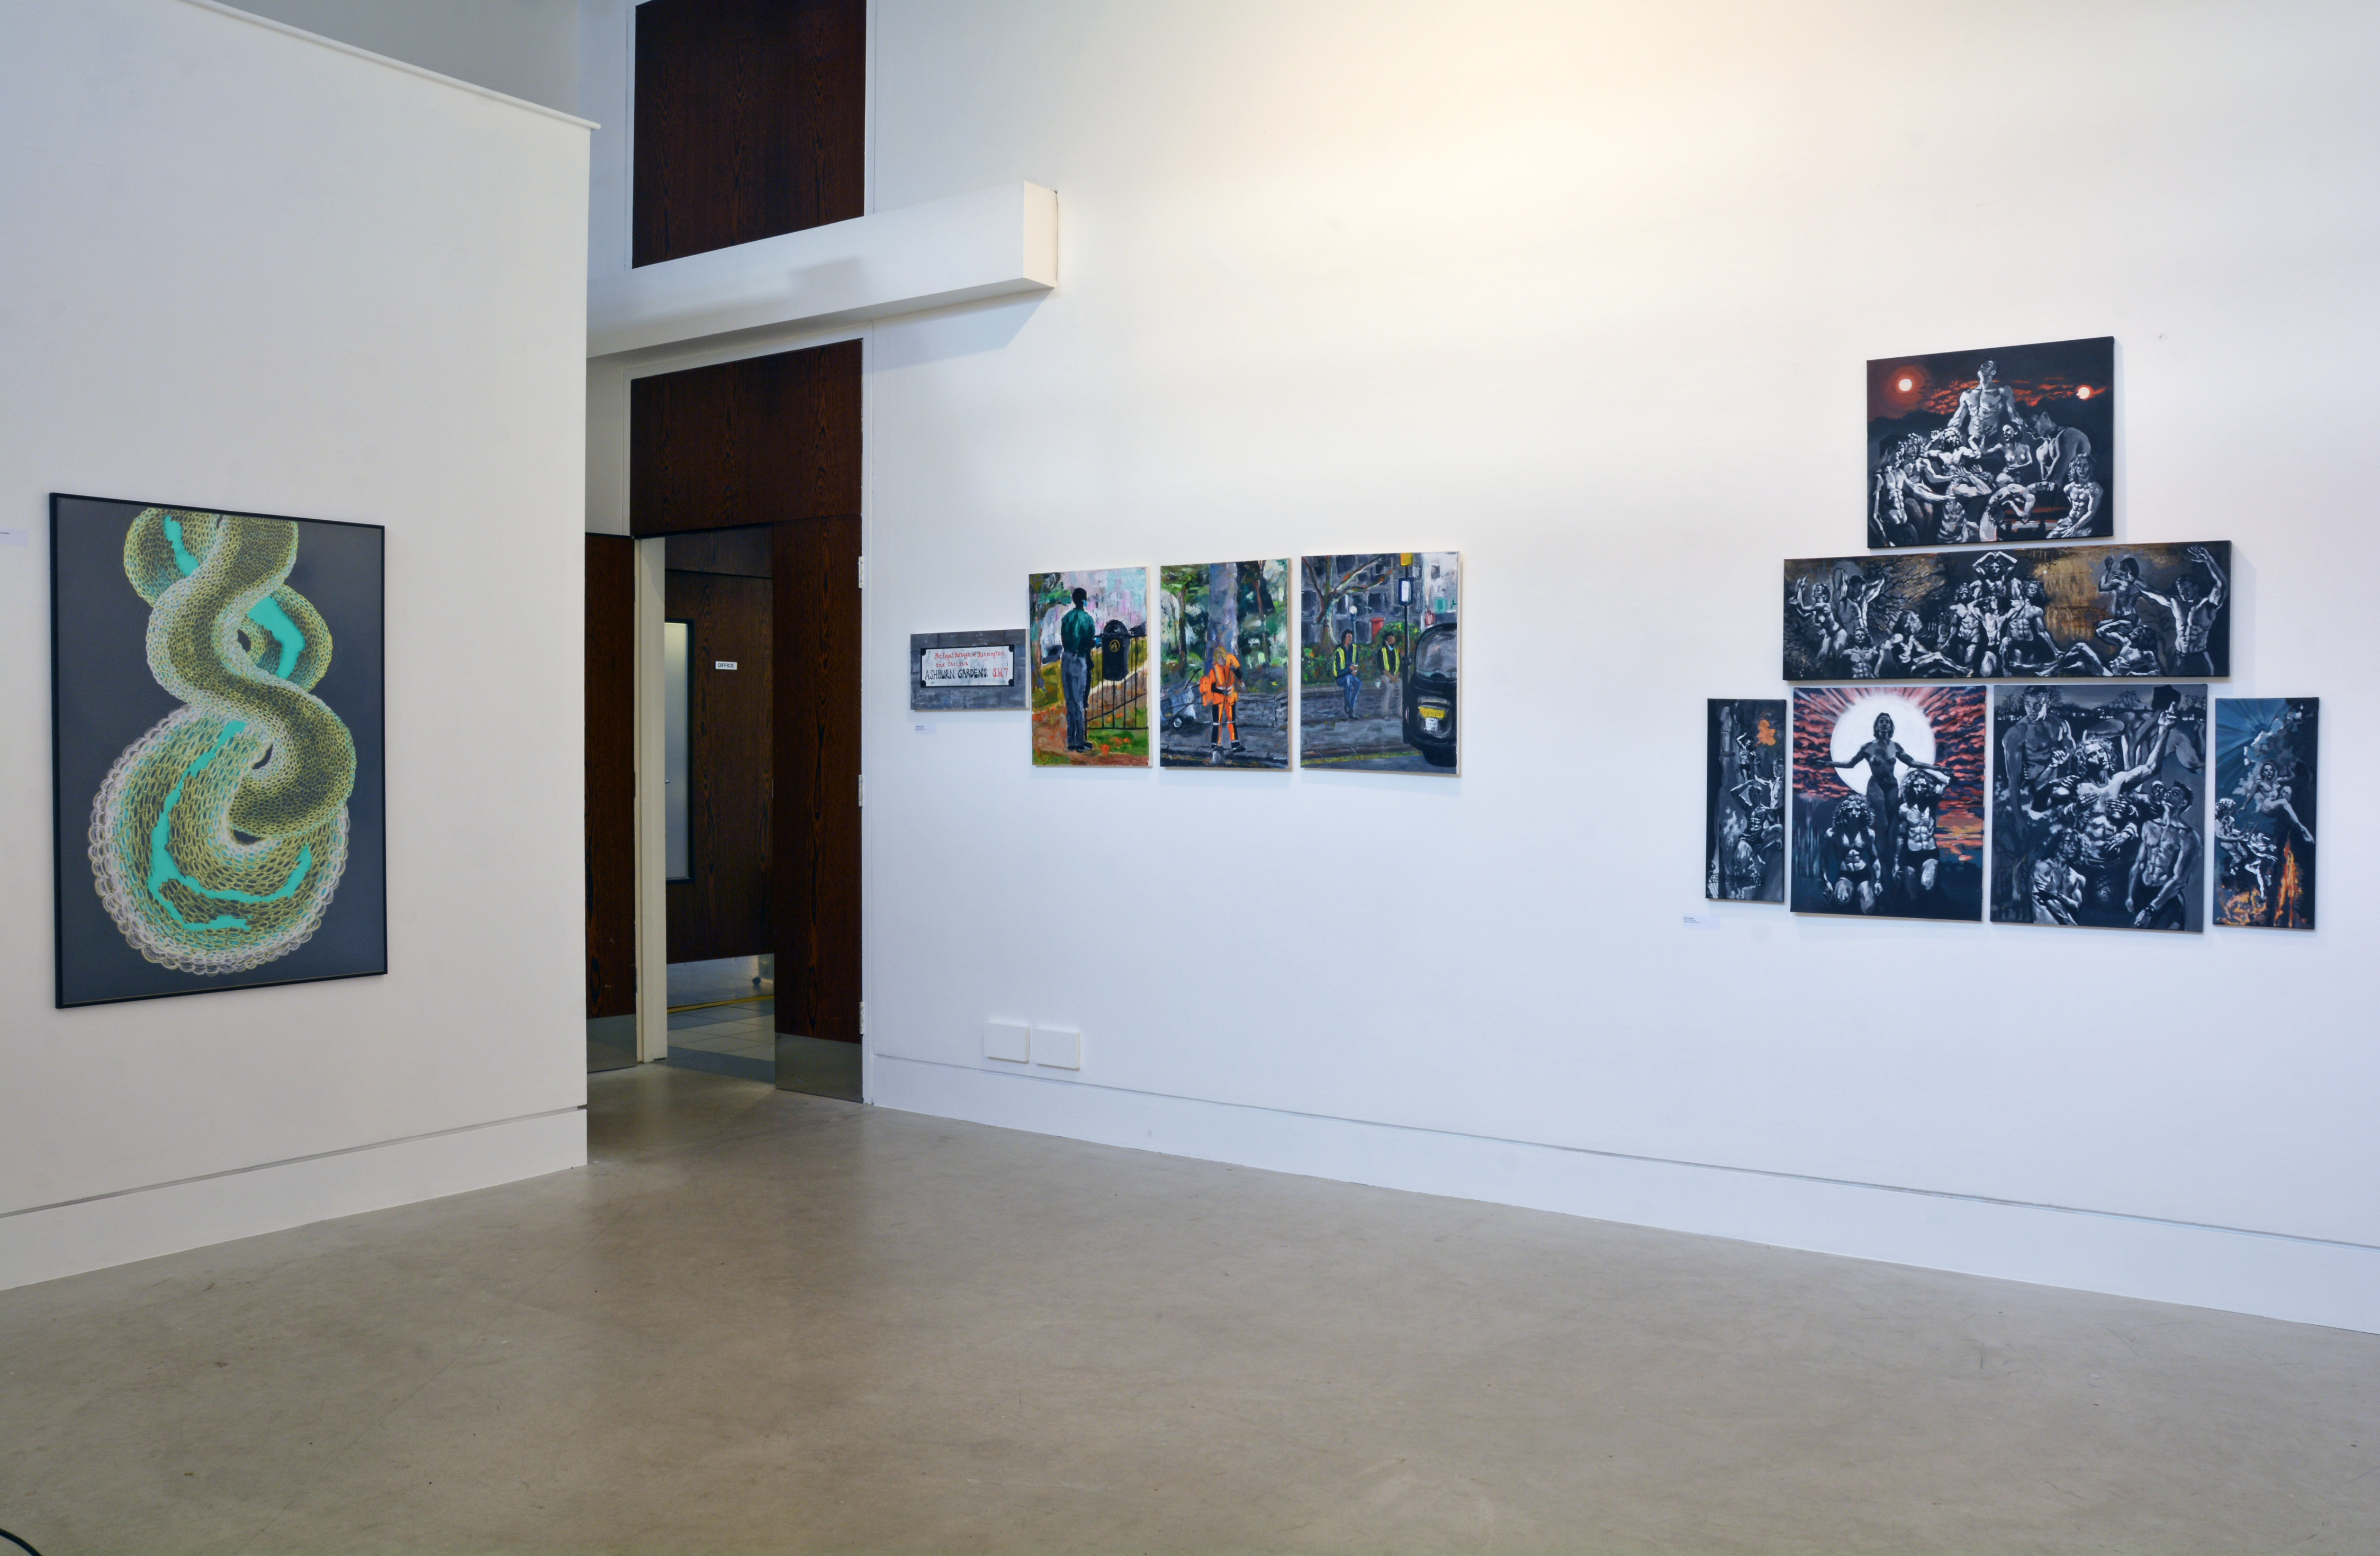 In a white walled space hangs a selection of artworks on the walls.